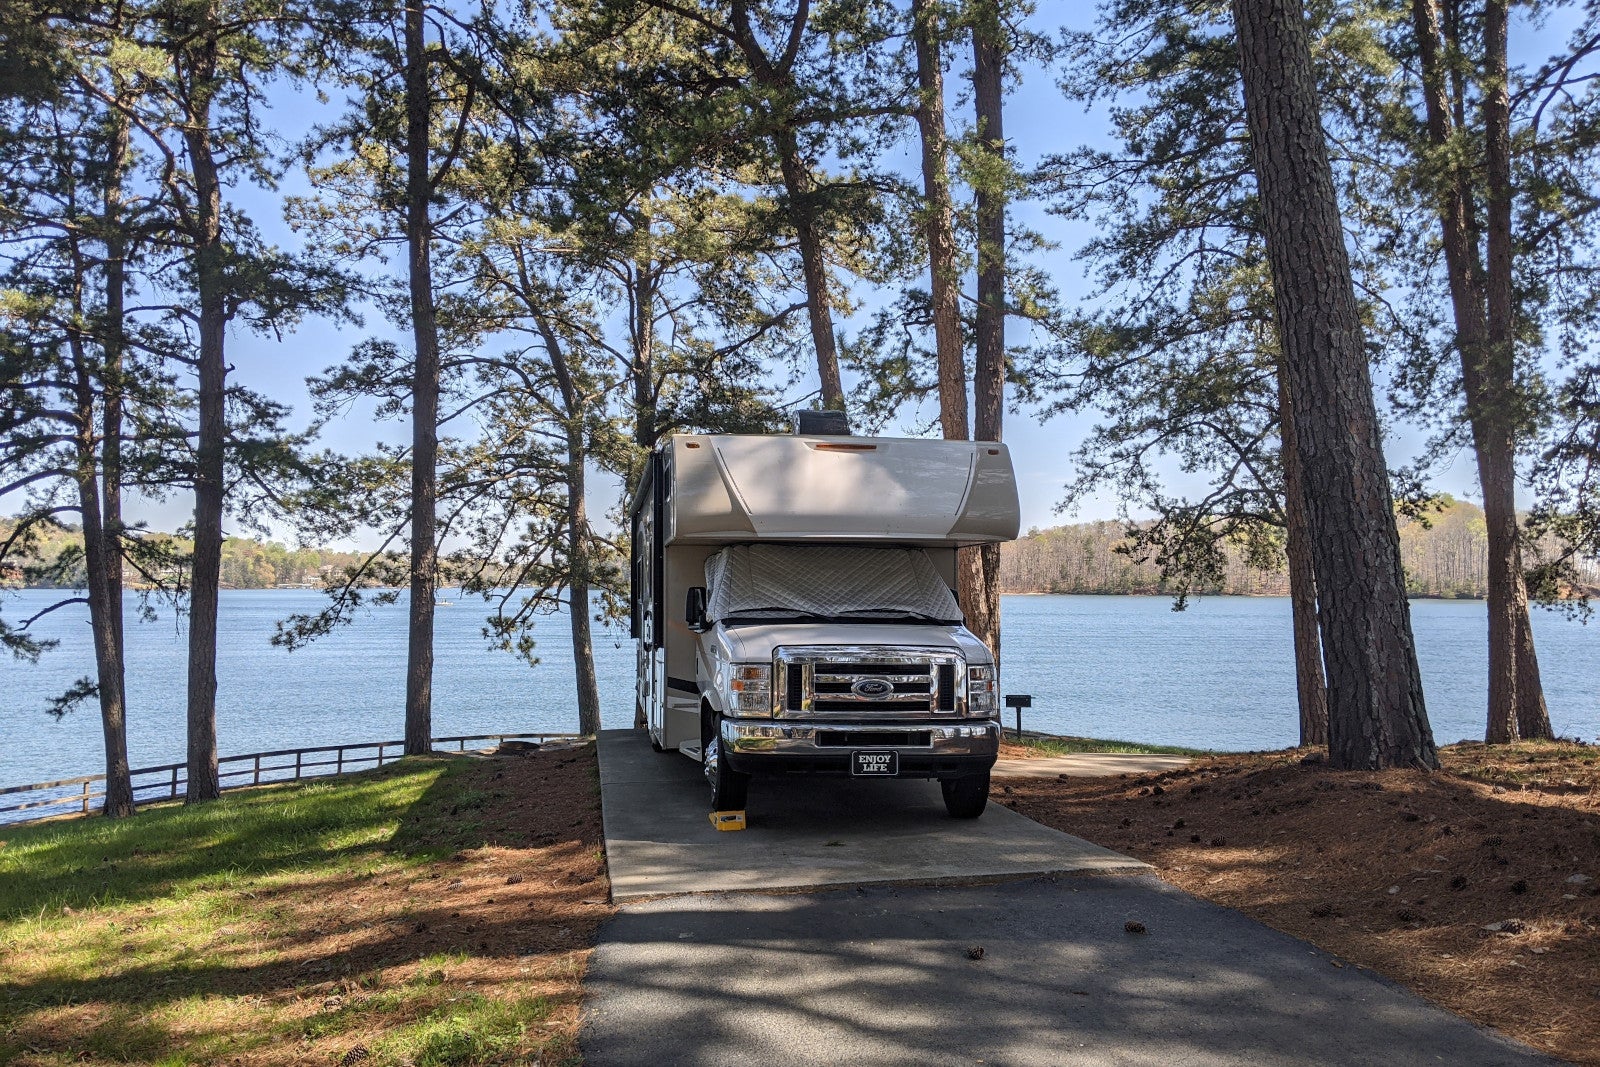 RV in a campground by a lake